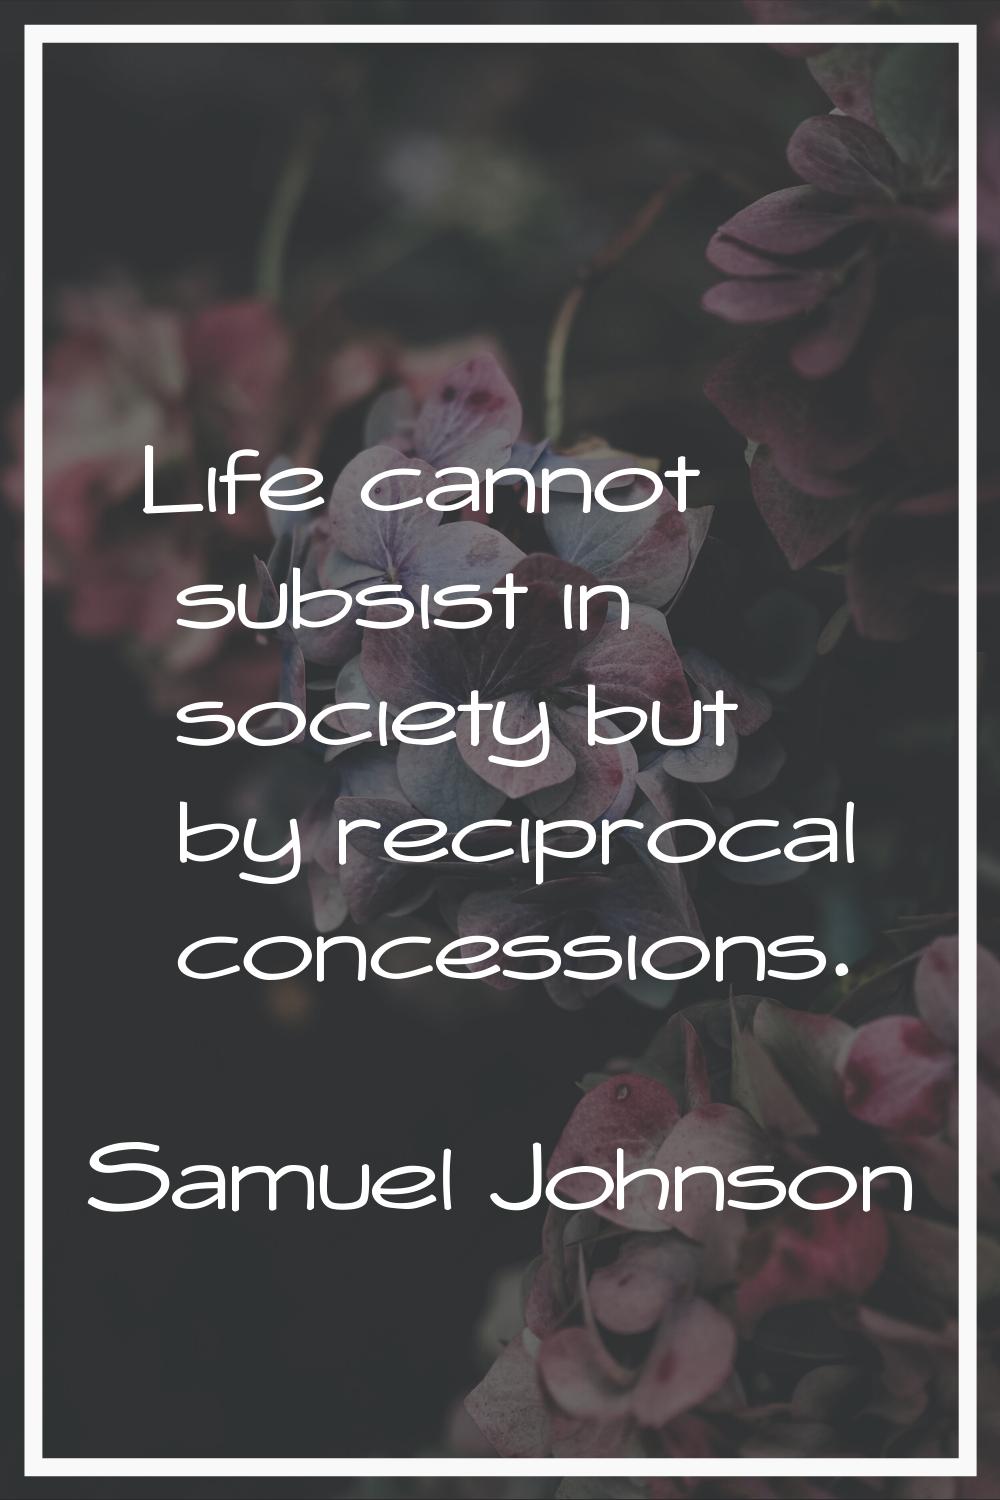 Life cannot subsist in society but by reciprocal concessions.